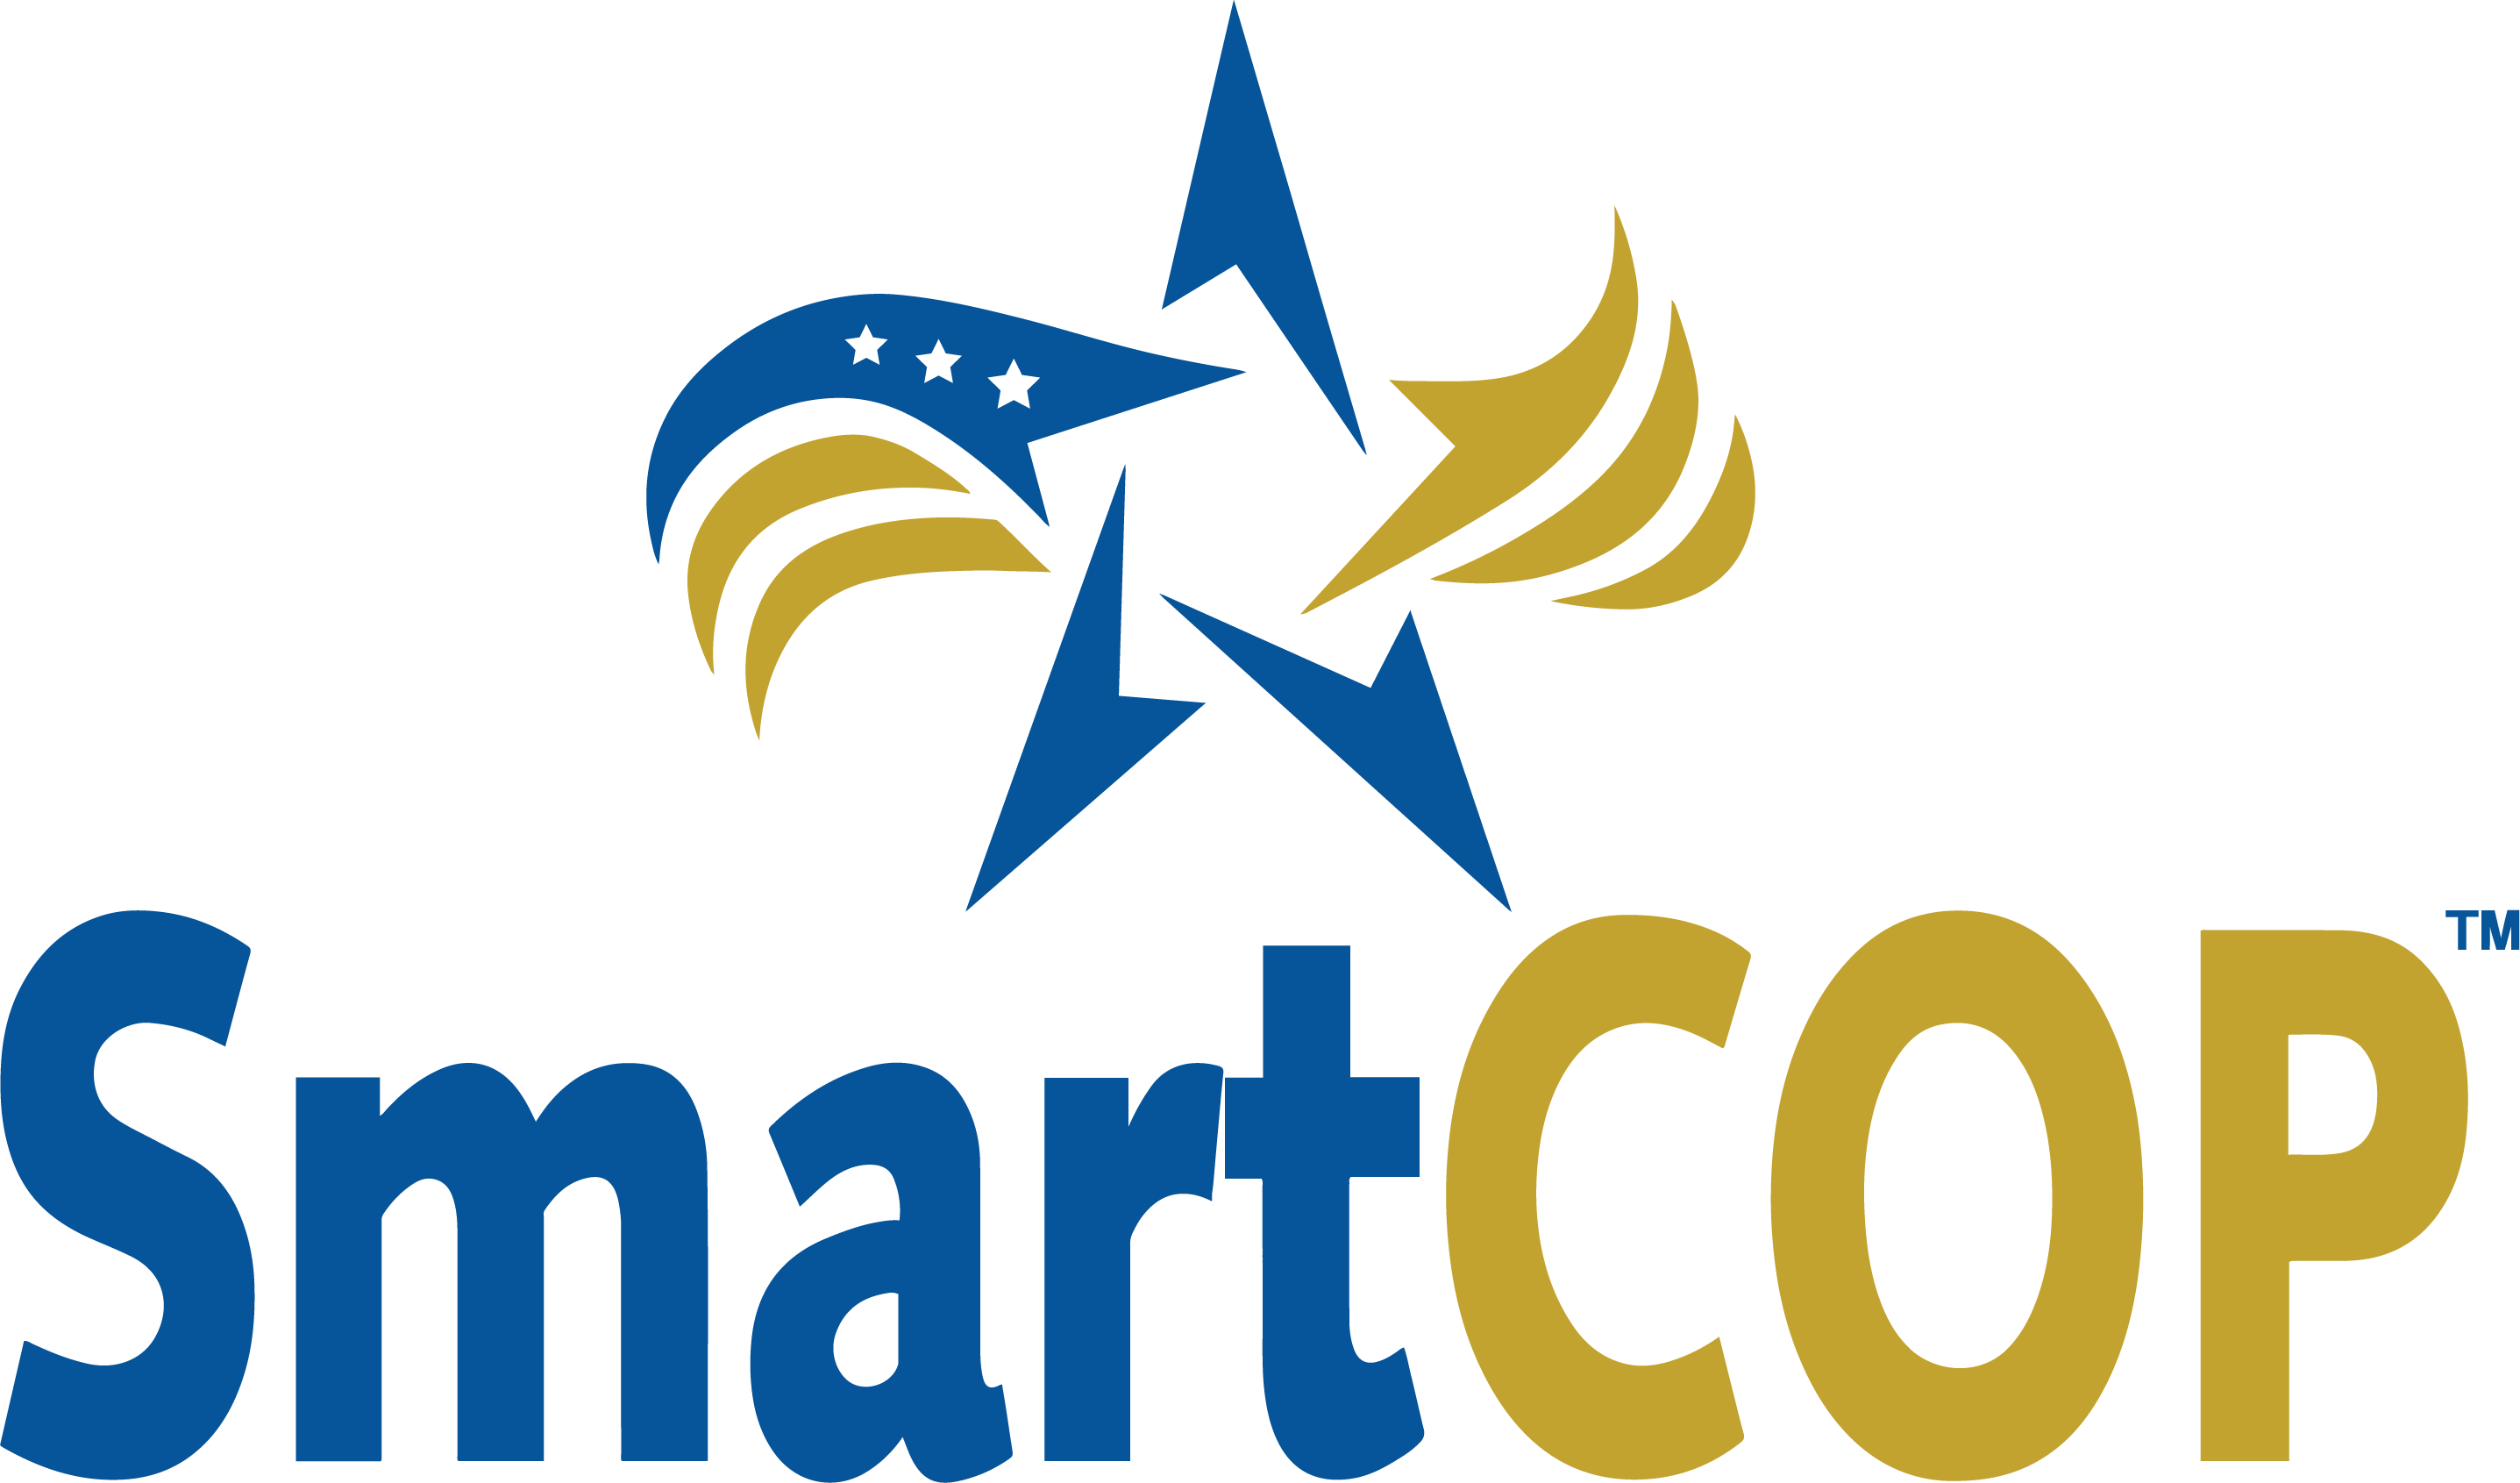 Full color, vertical SmartCOP logo. The star is stacked above the name.